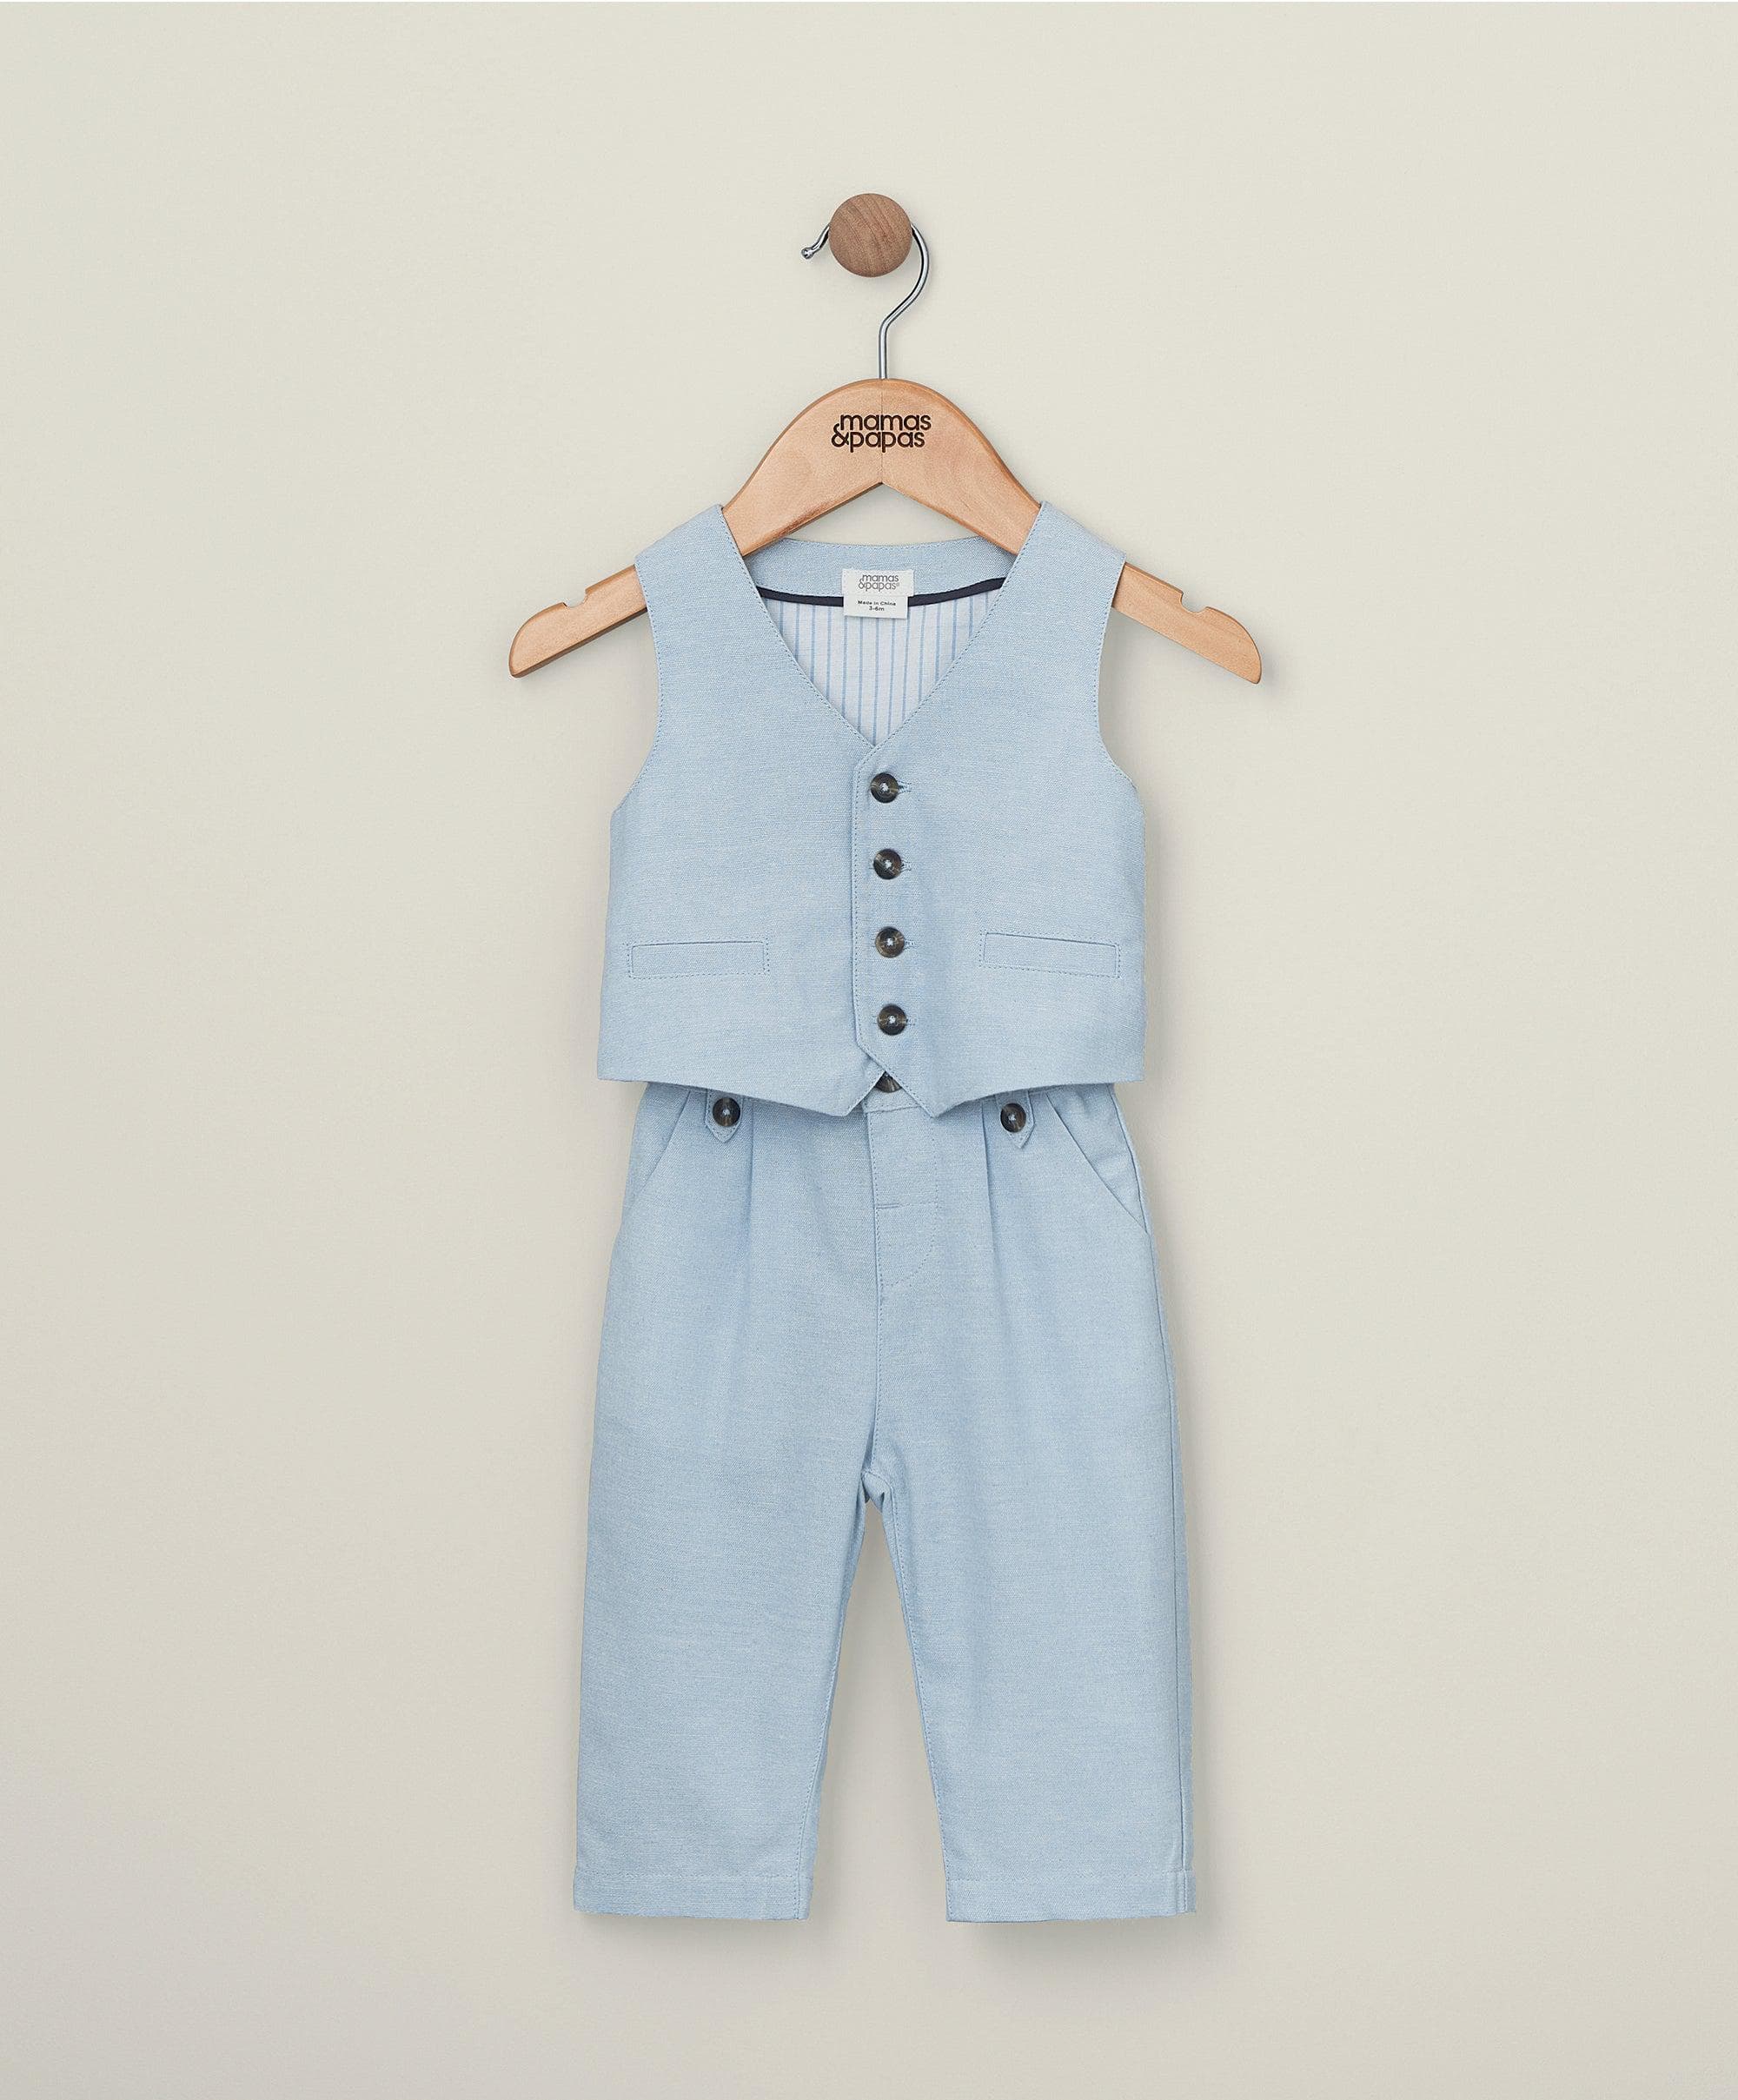 Waistcoat & Trousers Outfit Set - Blue